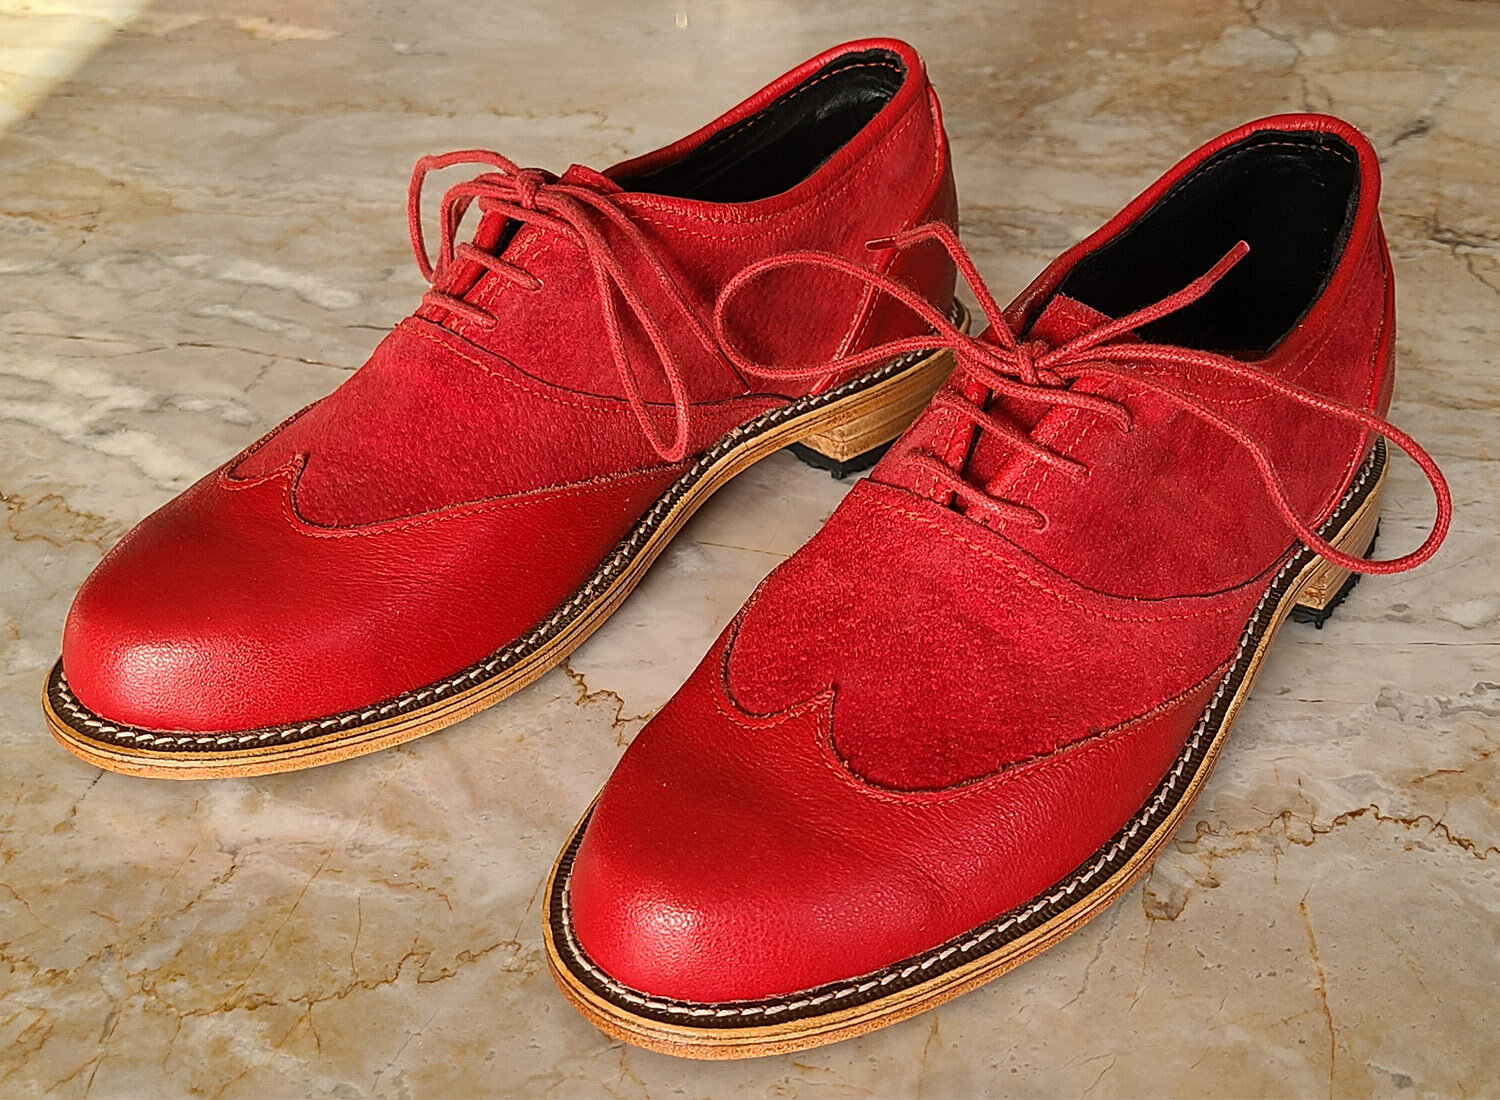 Red Oxford shoe.